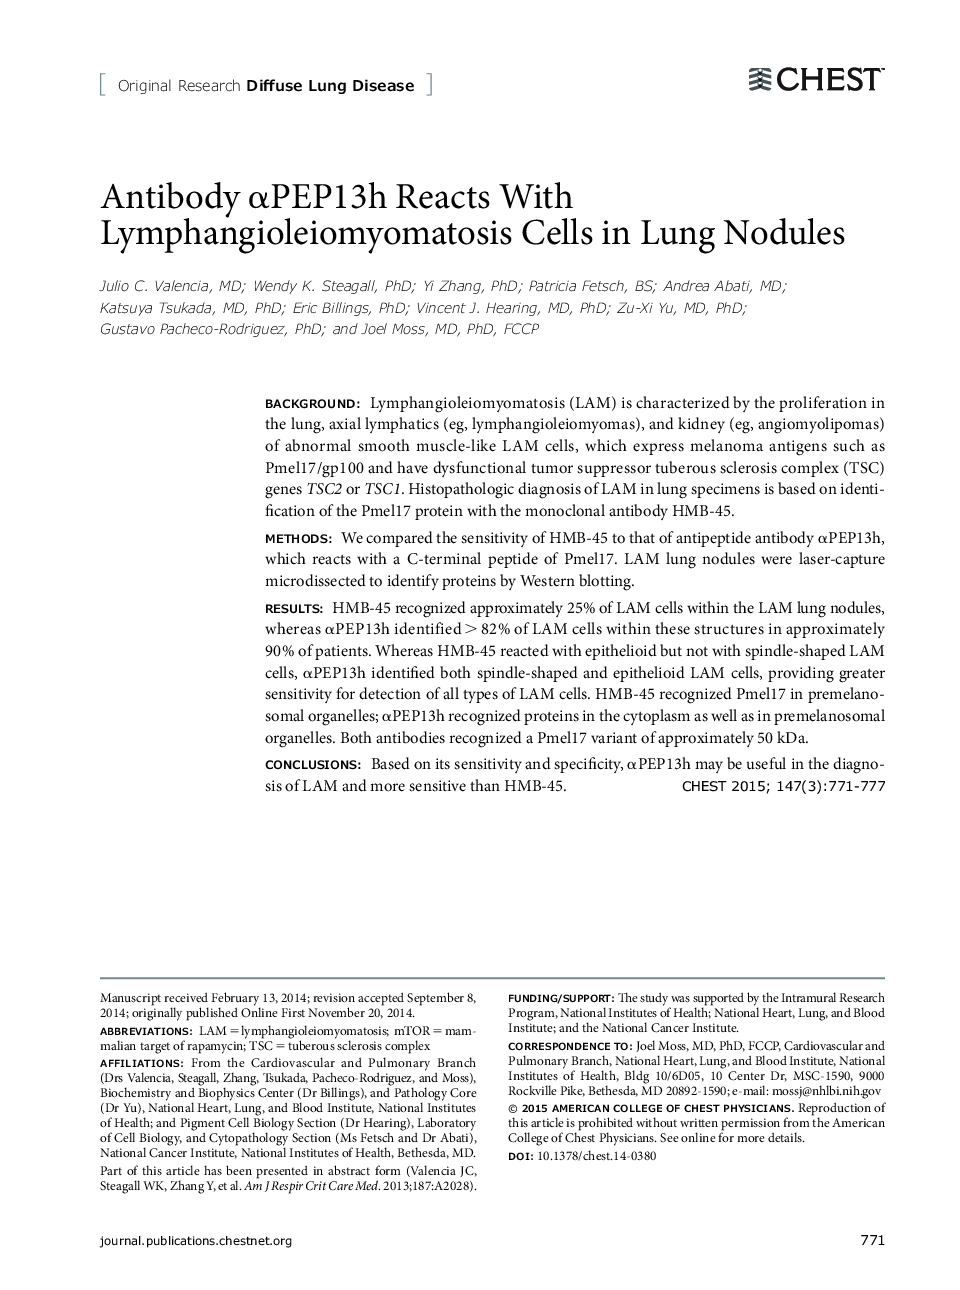 Antibody αPEP13h Reacts With Lymphangioleiomyomatosis Cells in Lung Nodules 